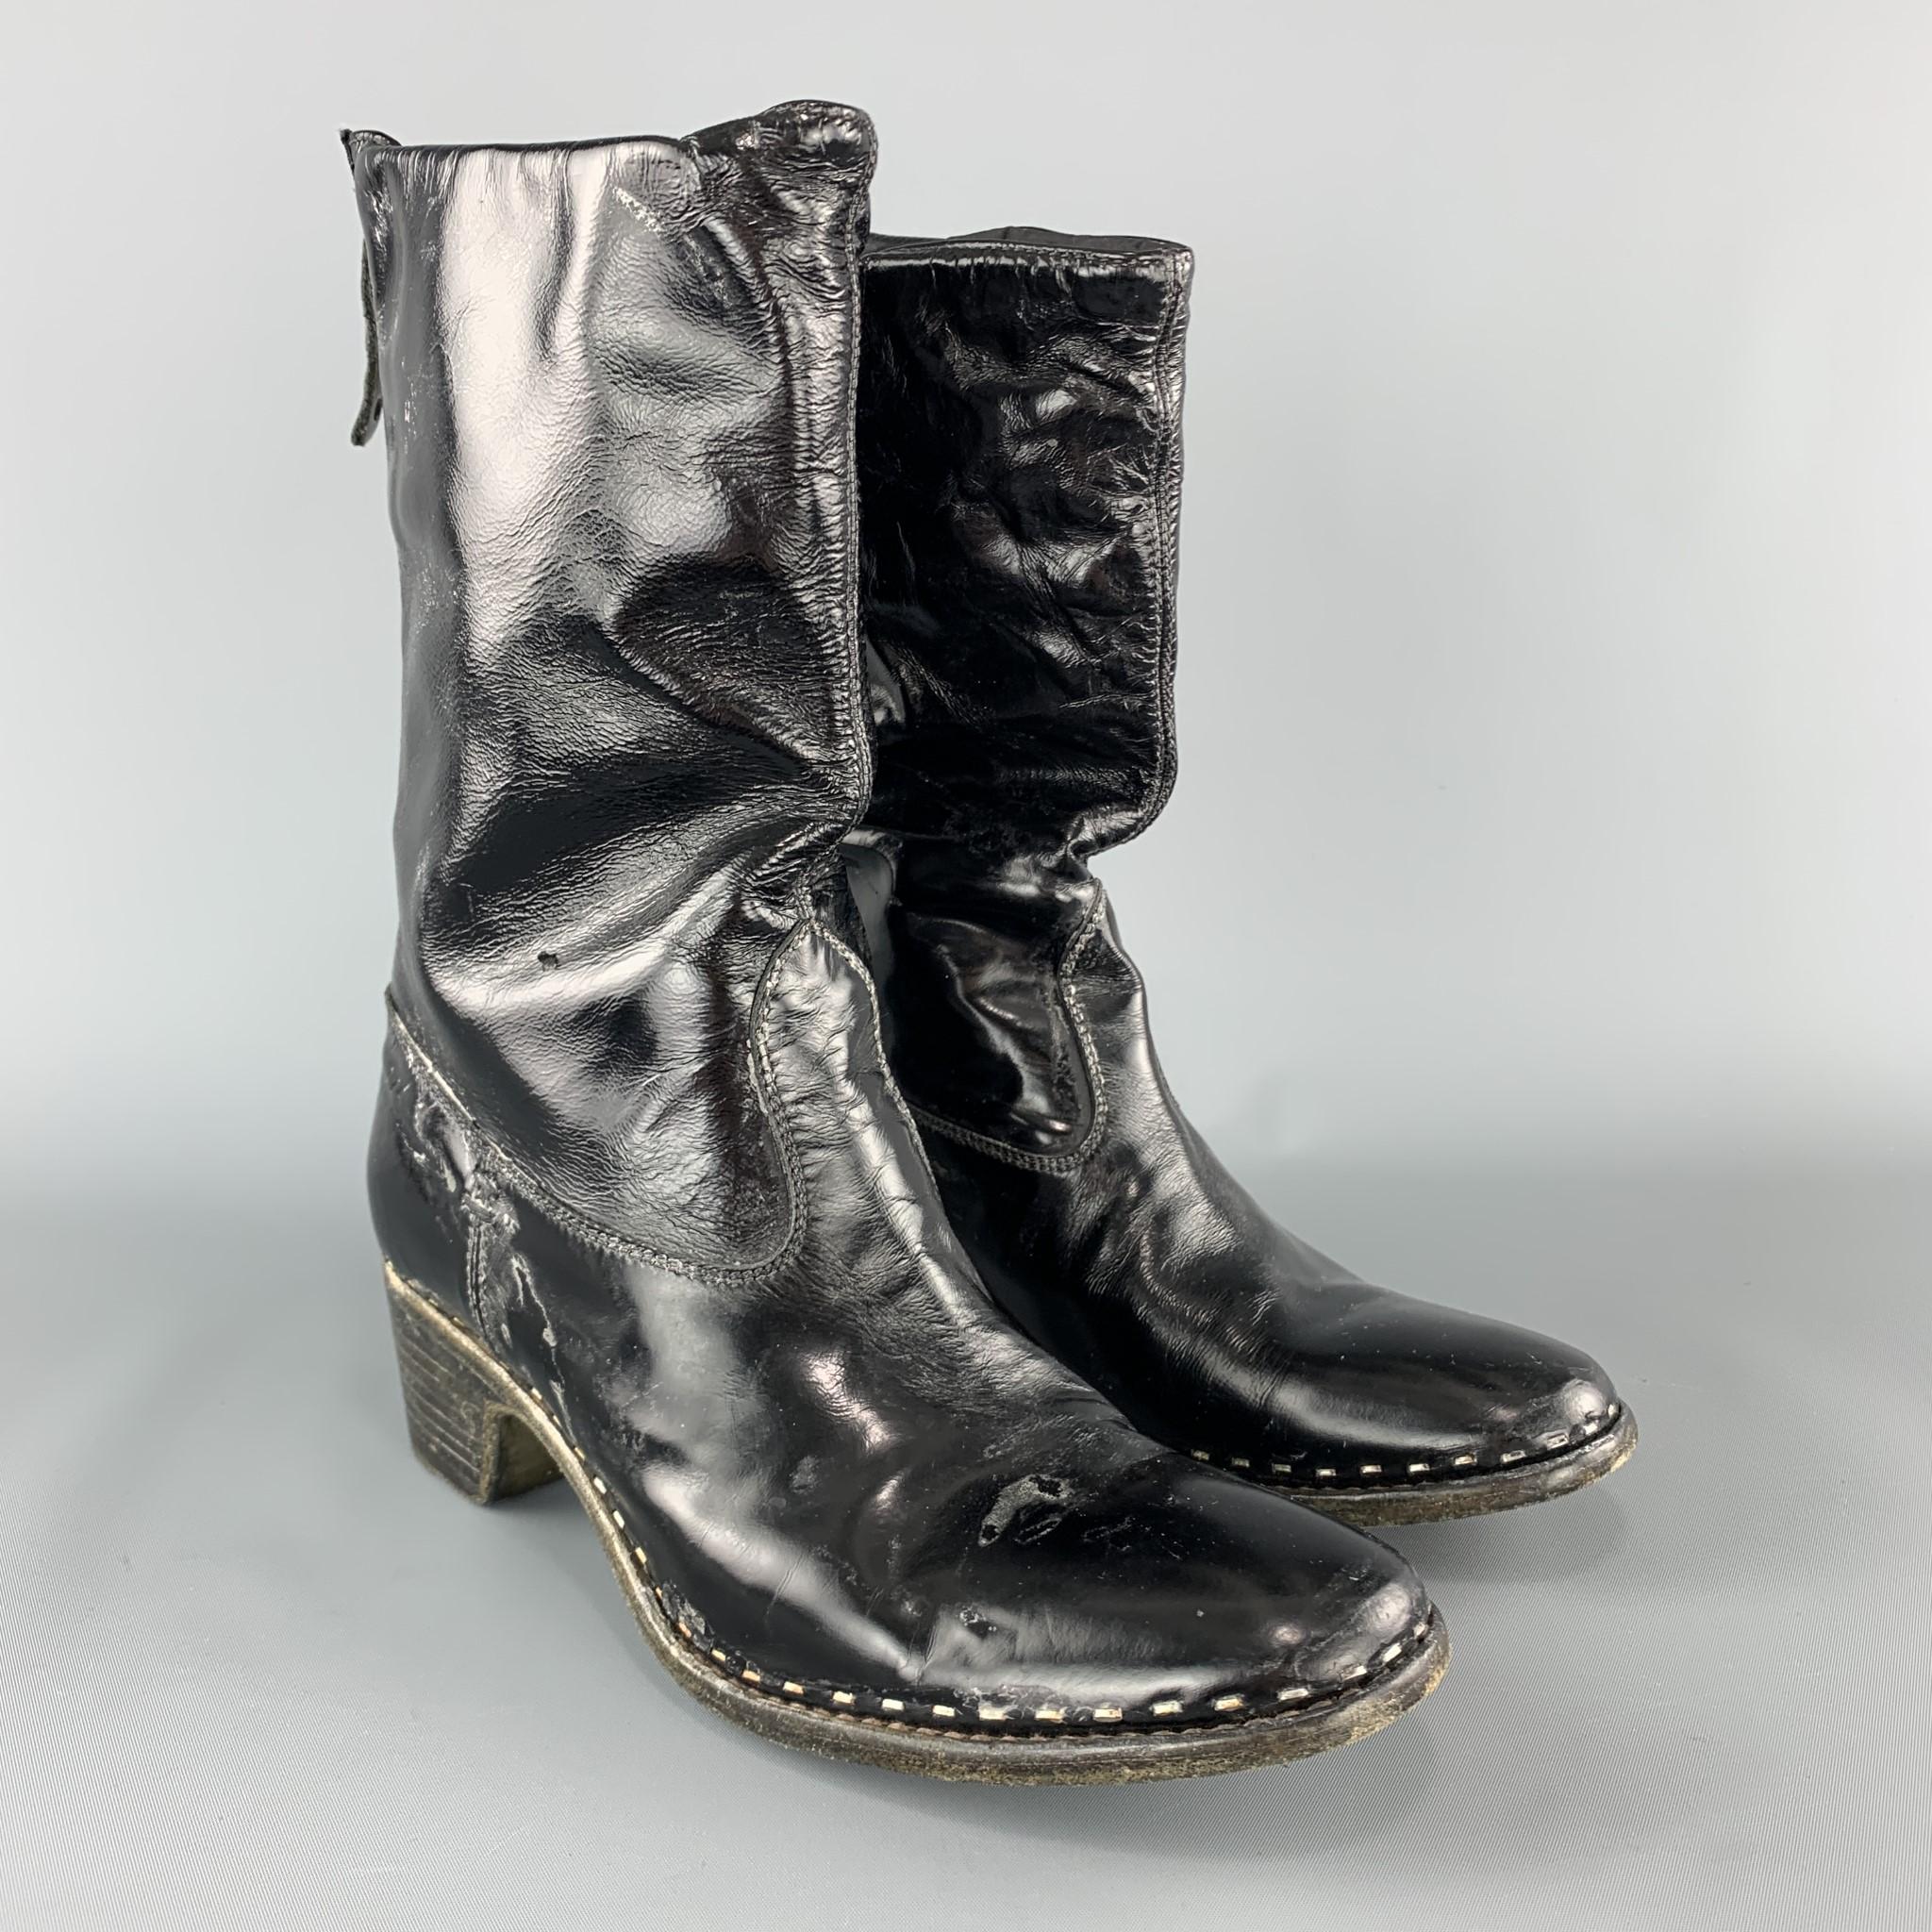 PREMIATA boots come in distressed black patent leather with a stacked heel sole and back zip closure.  Made in Italy.

Good Pre-Owned Condition.
Marked: IT 38

Heel: 2.25 in.
Length: 9 in.